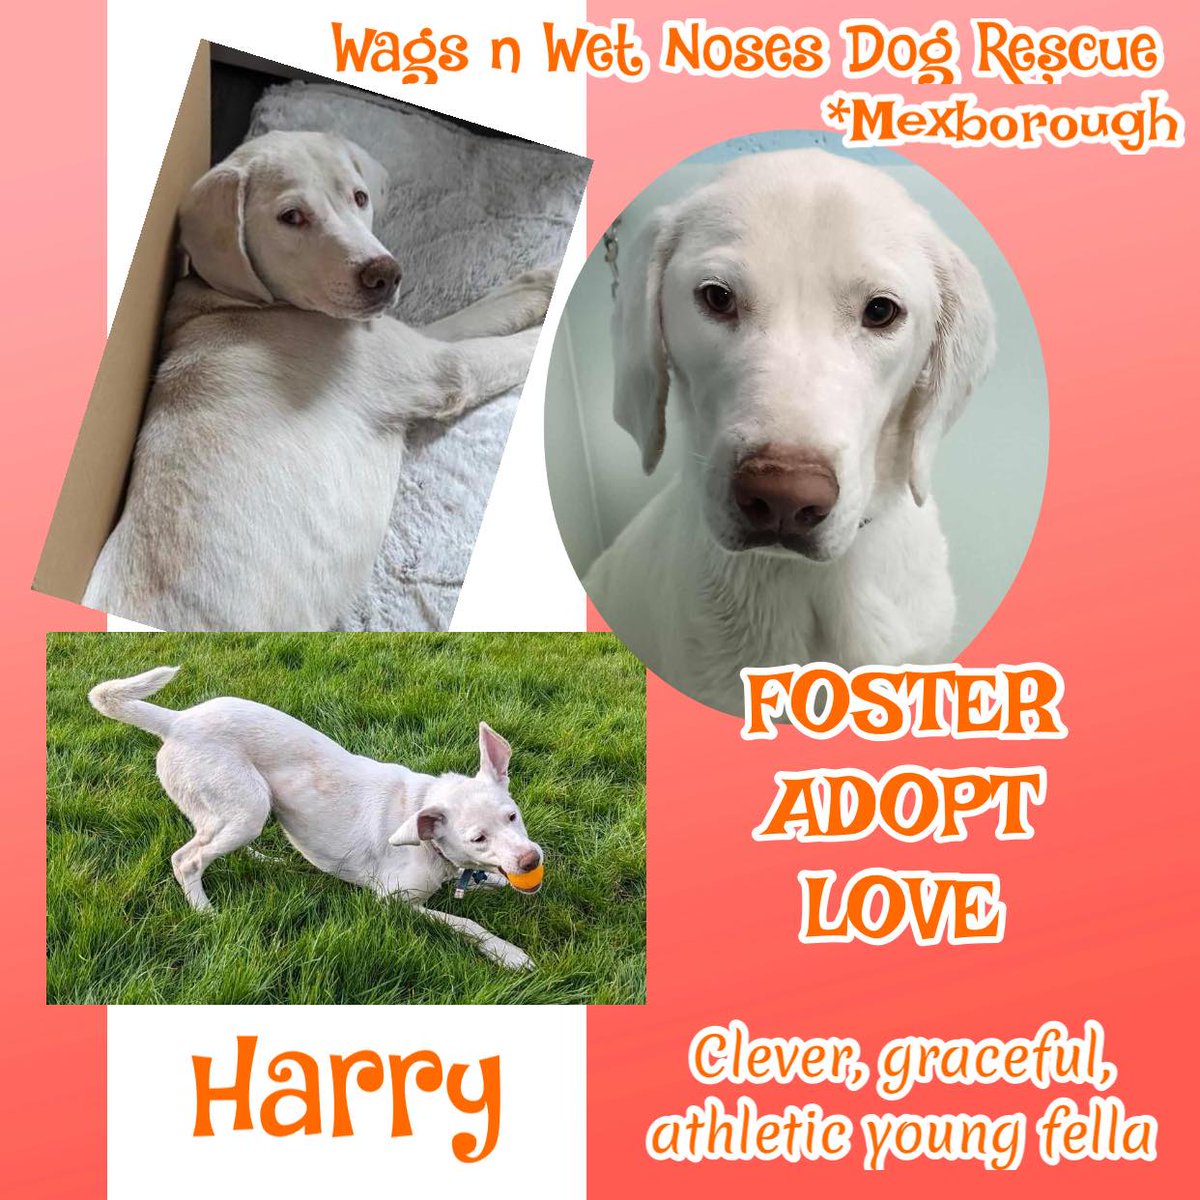 10mo Lab/Weimaraner mix HARRY is a really clever, graceful, athletic young boy who will need an adopter who can provide him with good physical & mental stimulation. In return, he will shower you with love, affection & lots of fun. He adores human contact, is very loyal & loving…